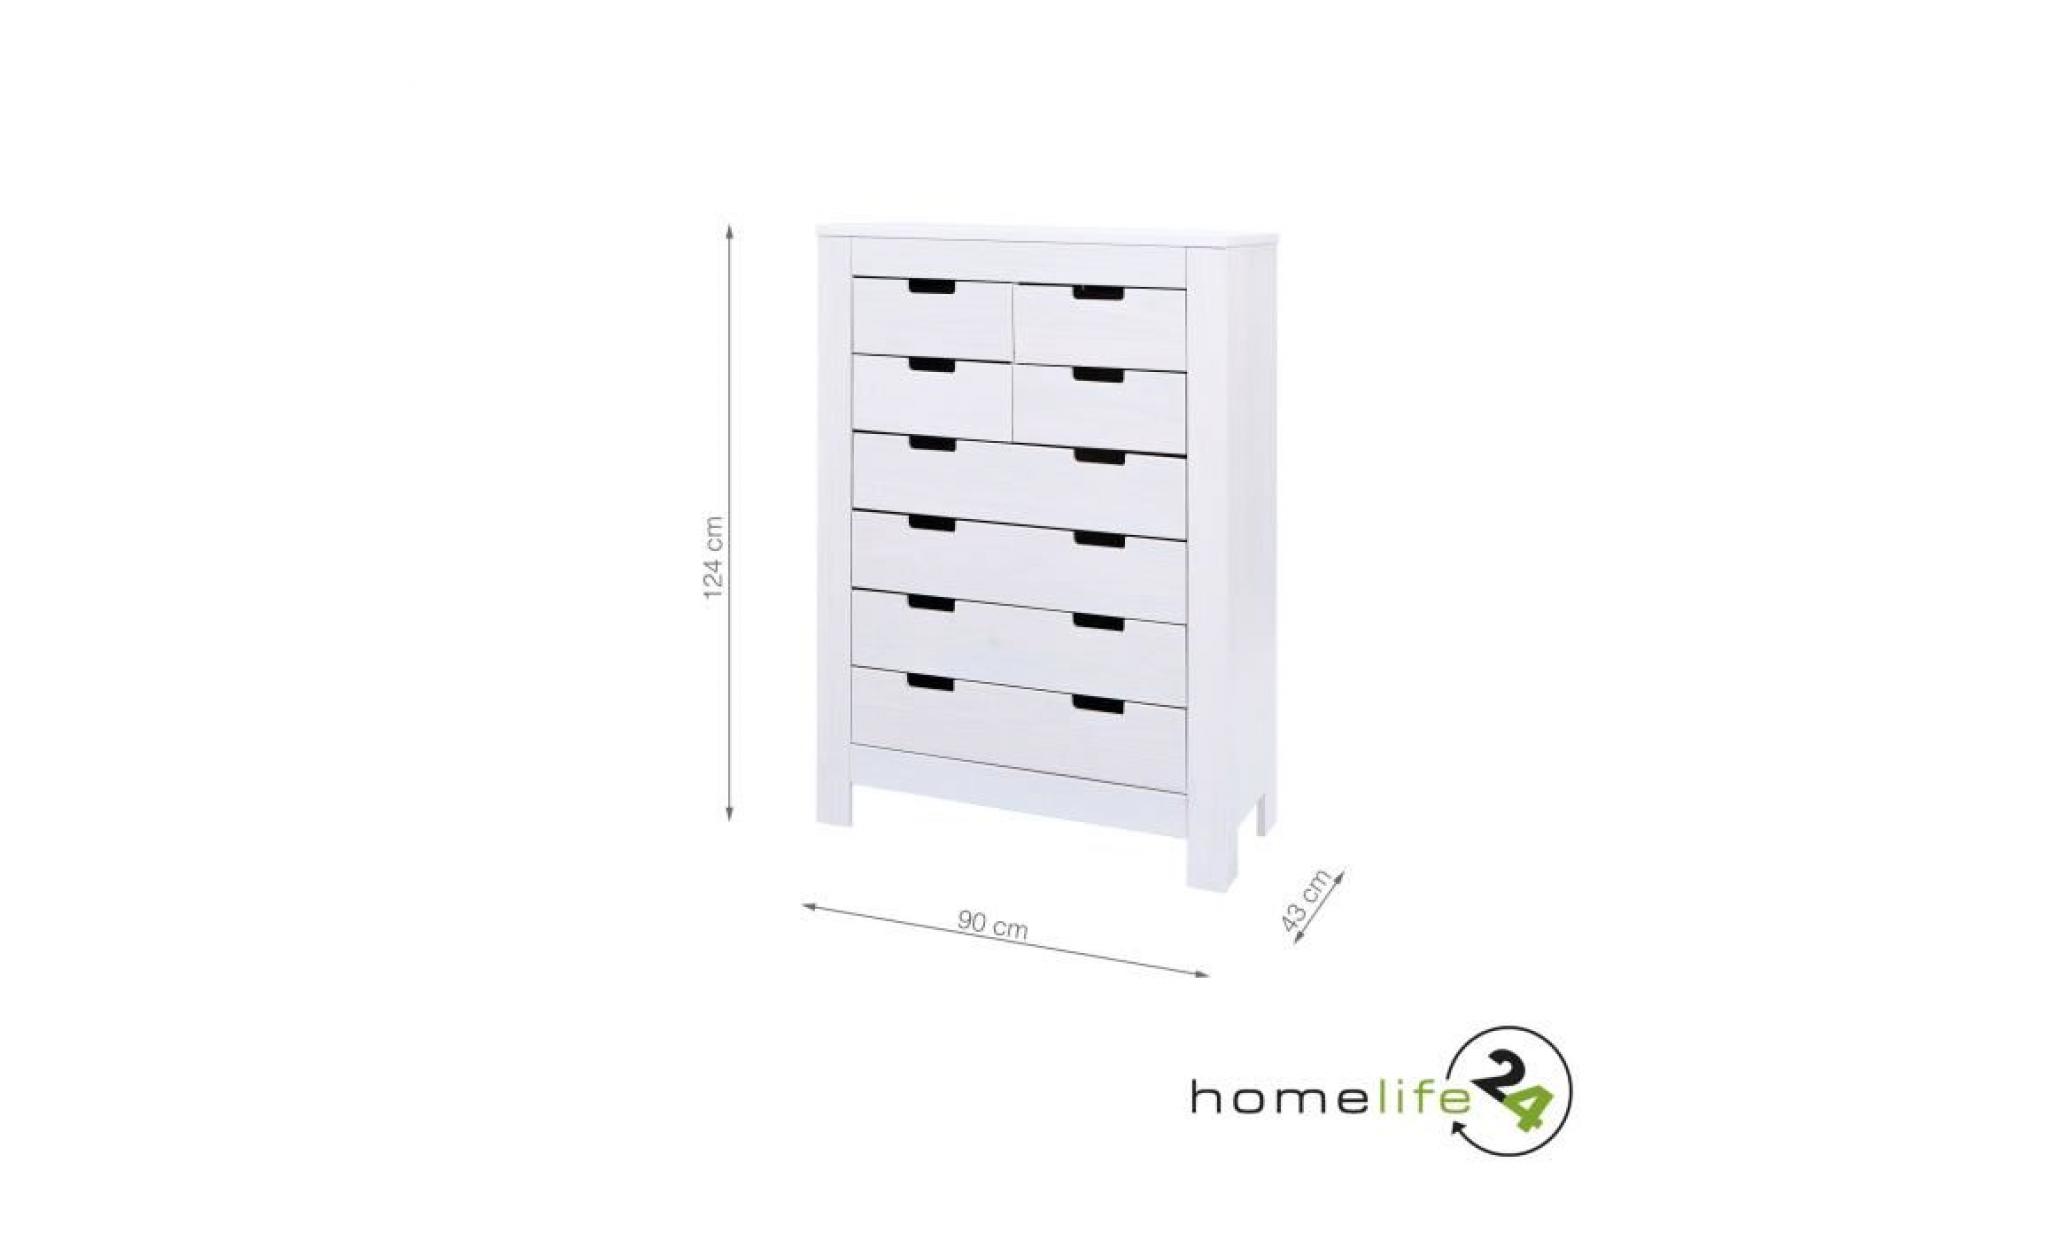 grande commode 8 tiroirs, commode en pin massif, commode chambre blanche, commode chiffonnier, armoire commode, meuble en pin pas cher